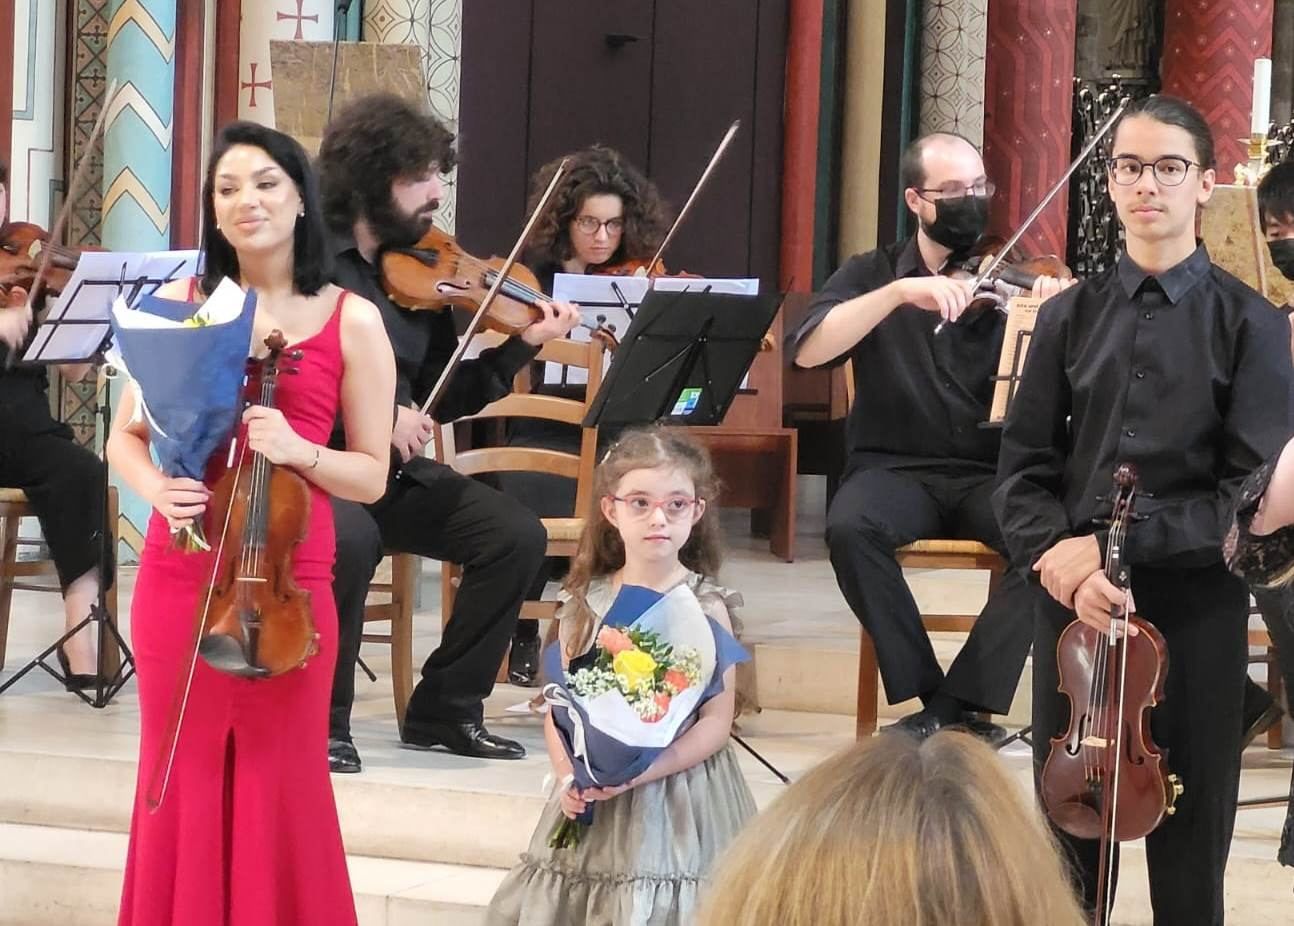 Young violinist wins music contest in France [PHOTO/VIDEO]